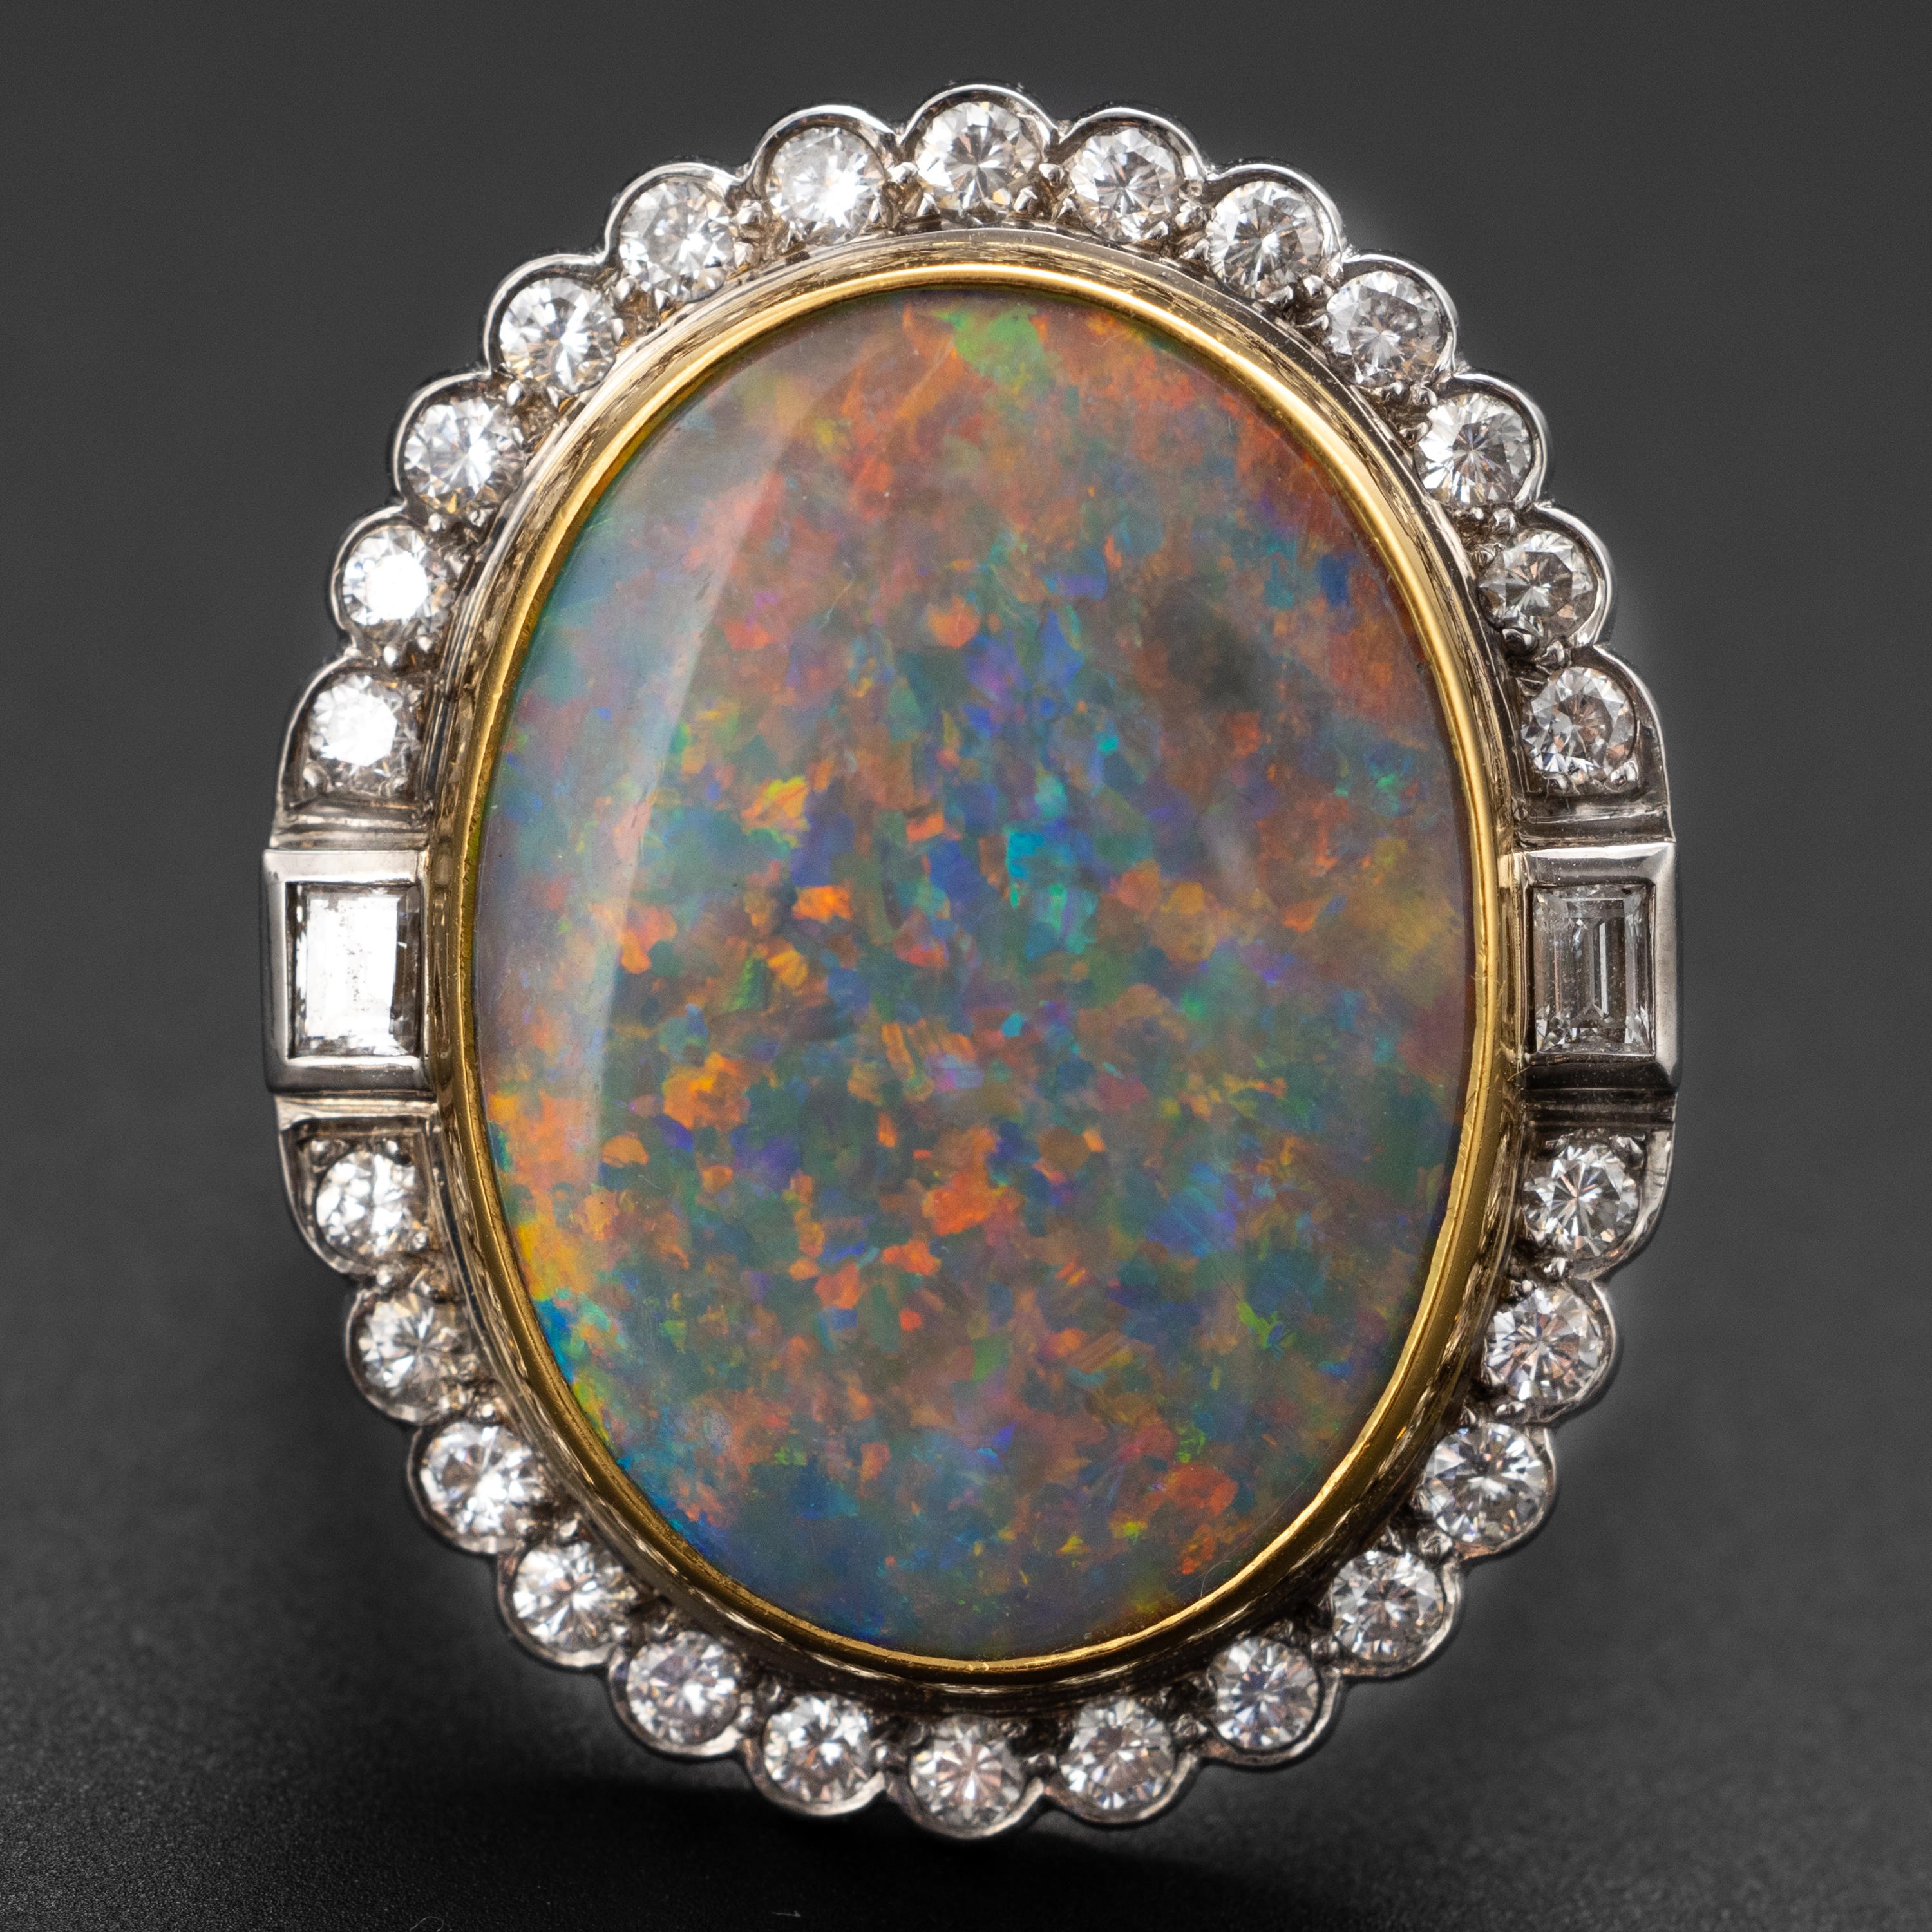 This haltingly impressive certified natural Australian black opal ring was created in England in 1988 by G. Bros of London. The stupendous opal displays every color in the spectrum —a rare and enormously desirable quality in Australian black opal.